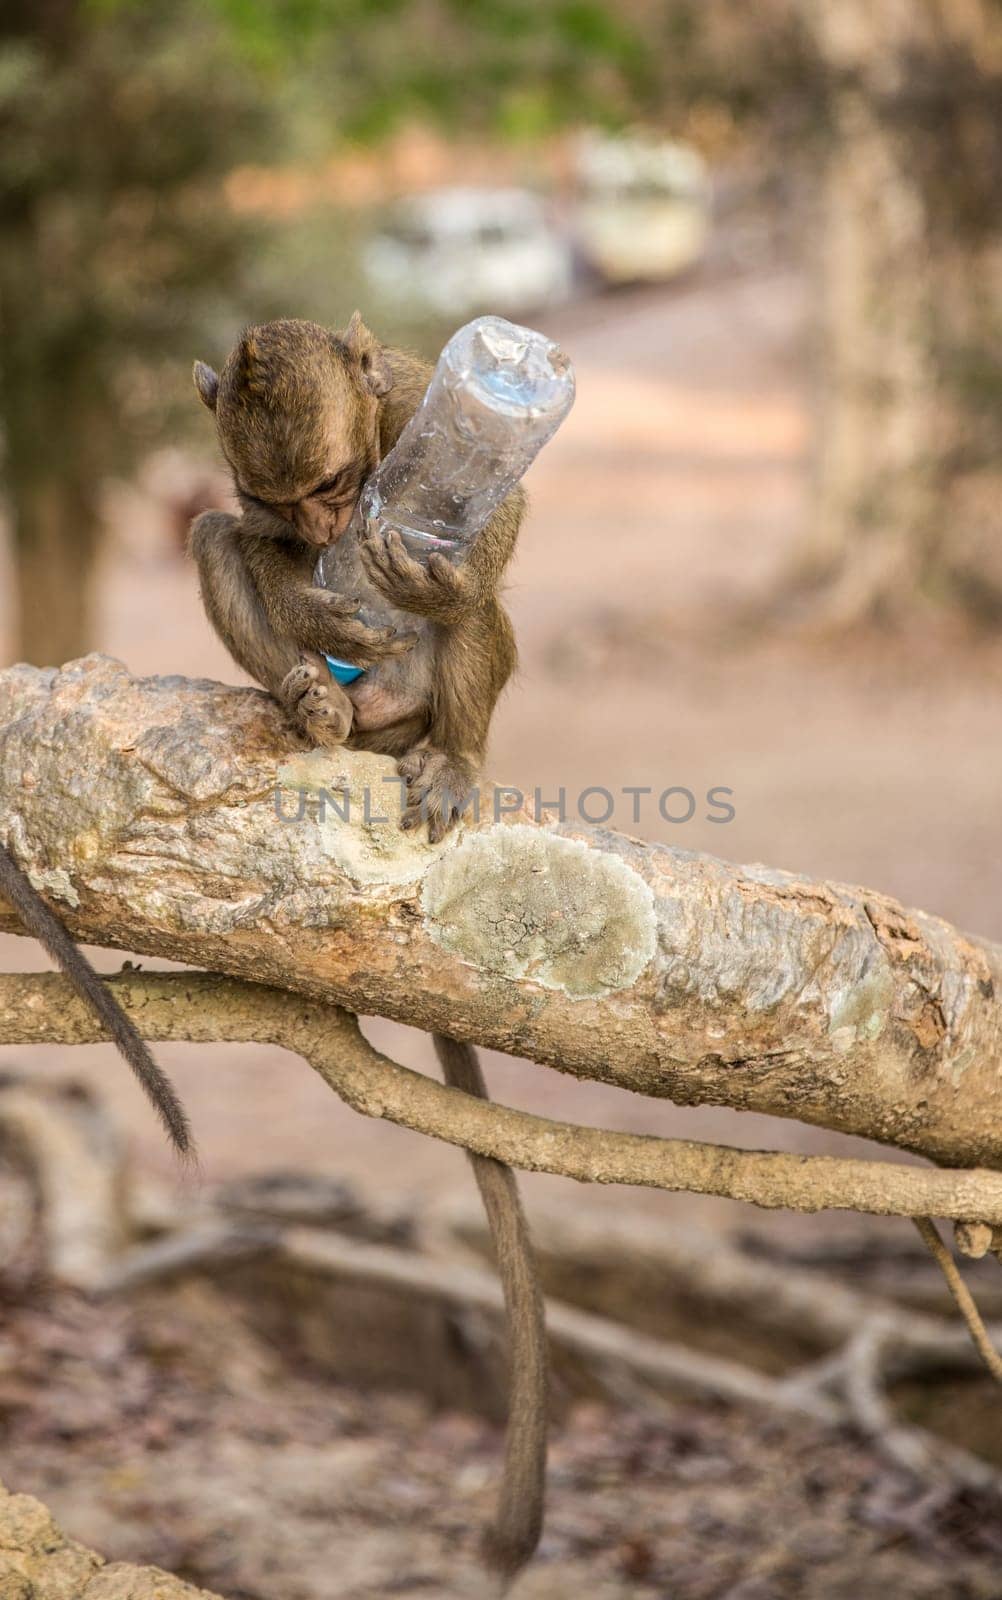 Monkey with Water Bottle thats a pollutant